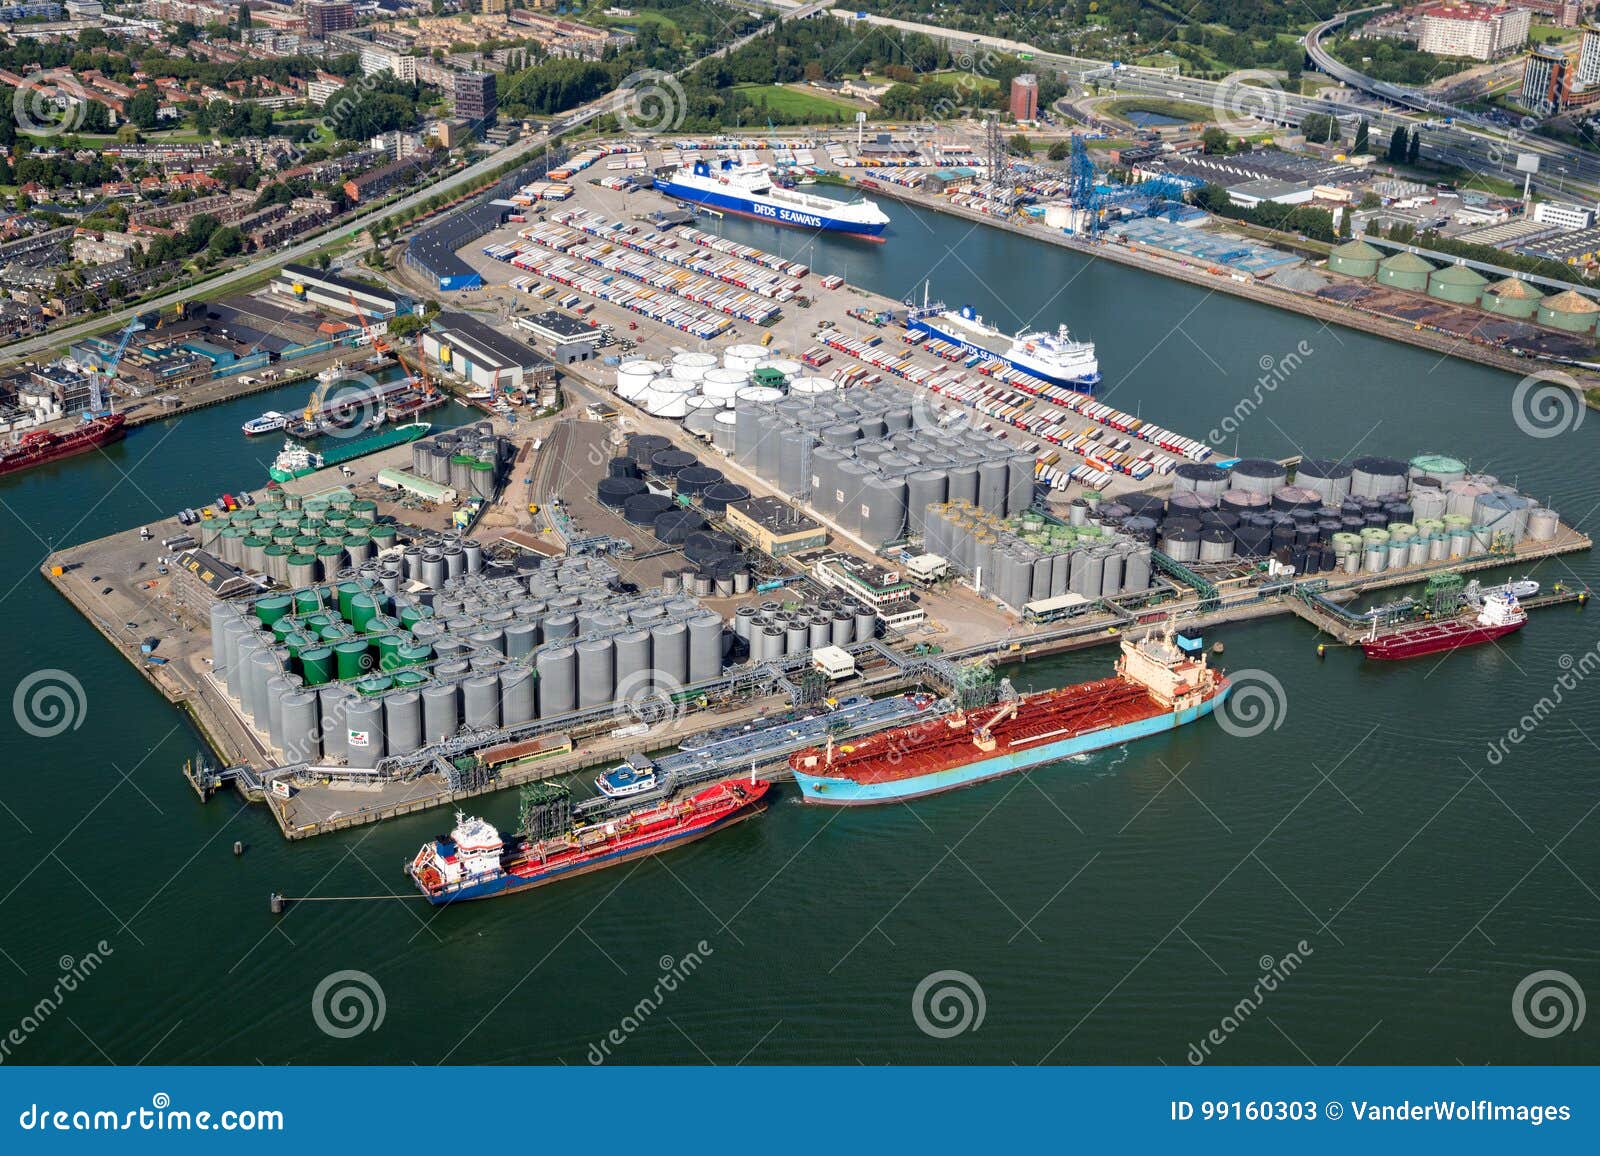 Port Rotterdam Oil Container Shipping Editorial Stock Photo - Image of global, import: 99160303